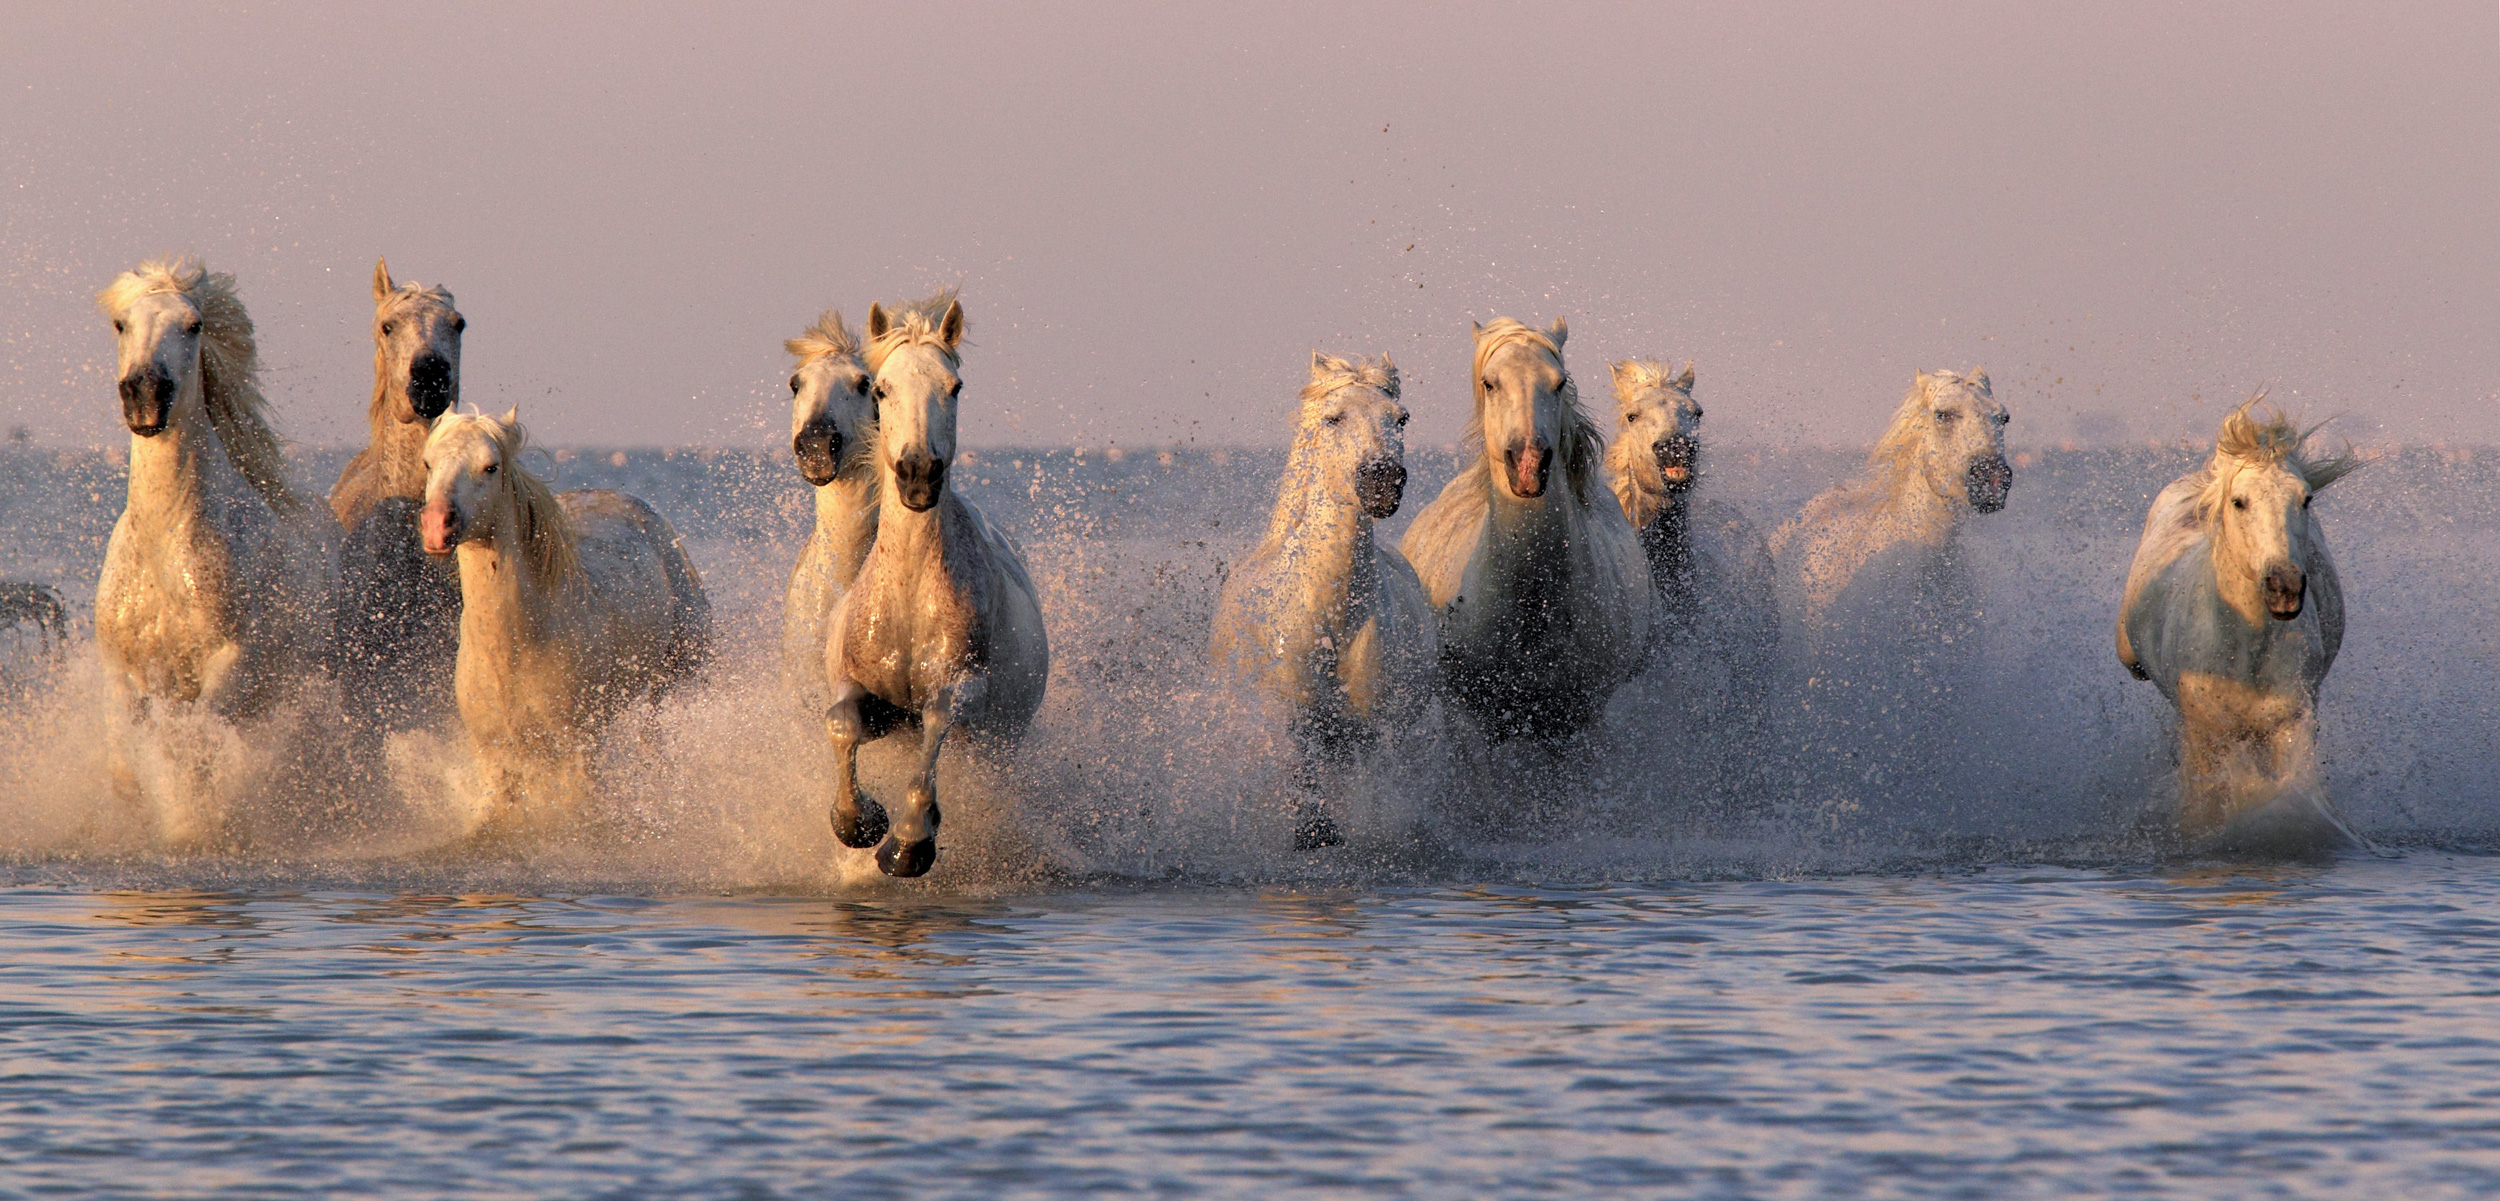 Horses have adapted to nearly every environment, including the world’s coasts. Photo by FLPA/Alamy Stock Photo